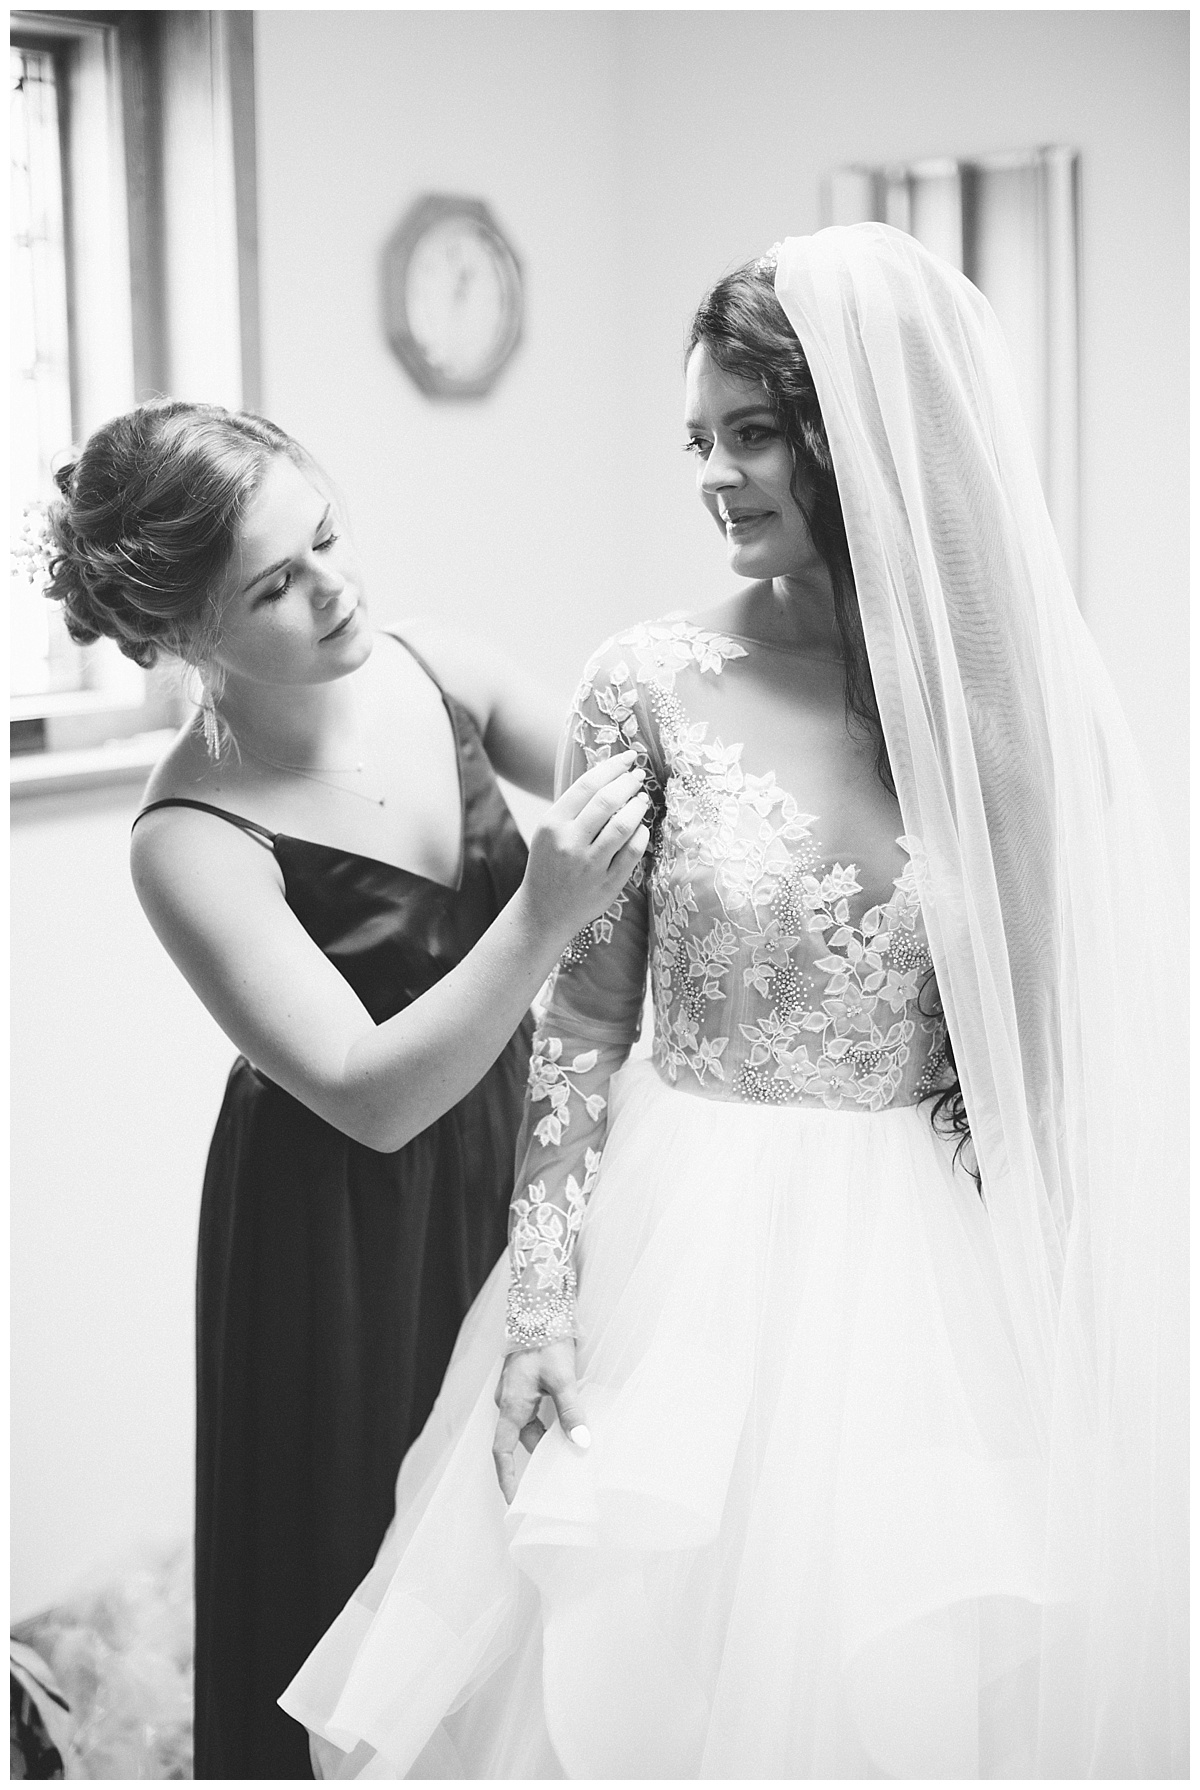 Hayley Paige, getting ready, bride, ballgown, wausau, greenwood hills country club, central wisconsin wedding photographer, madison wedding photographer